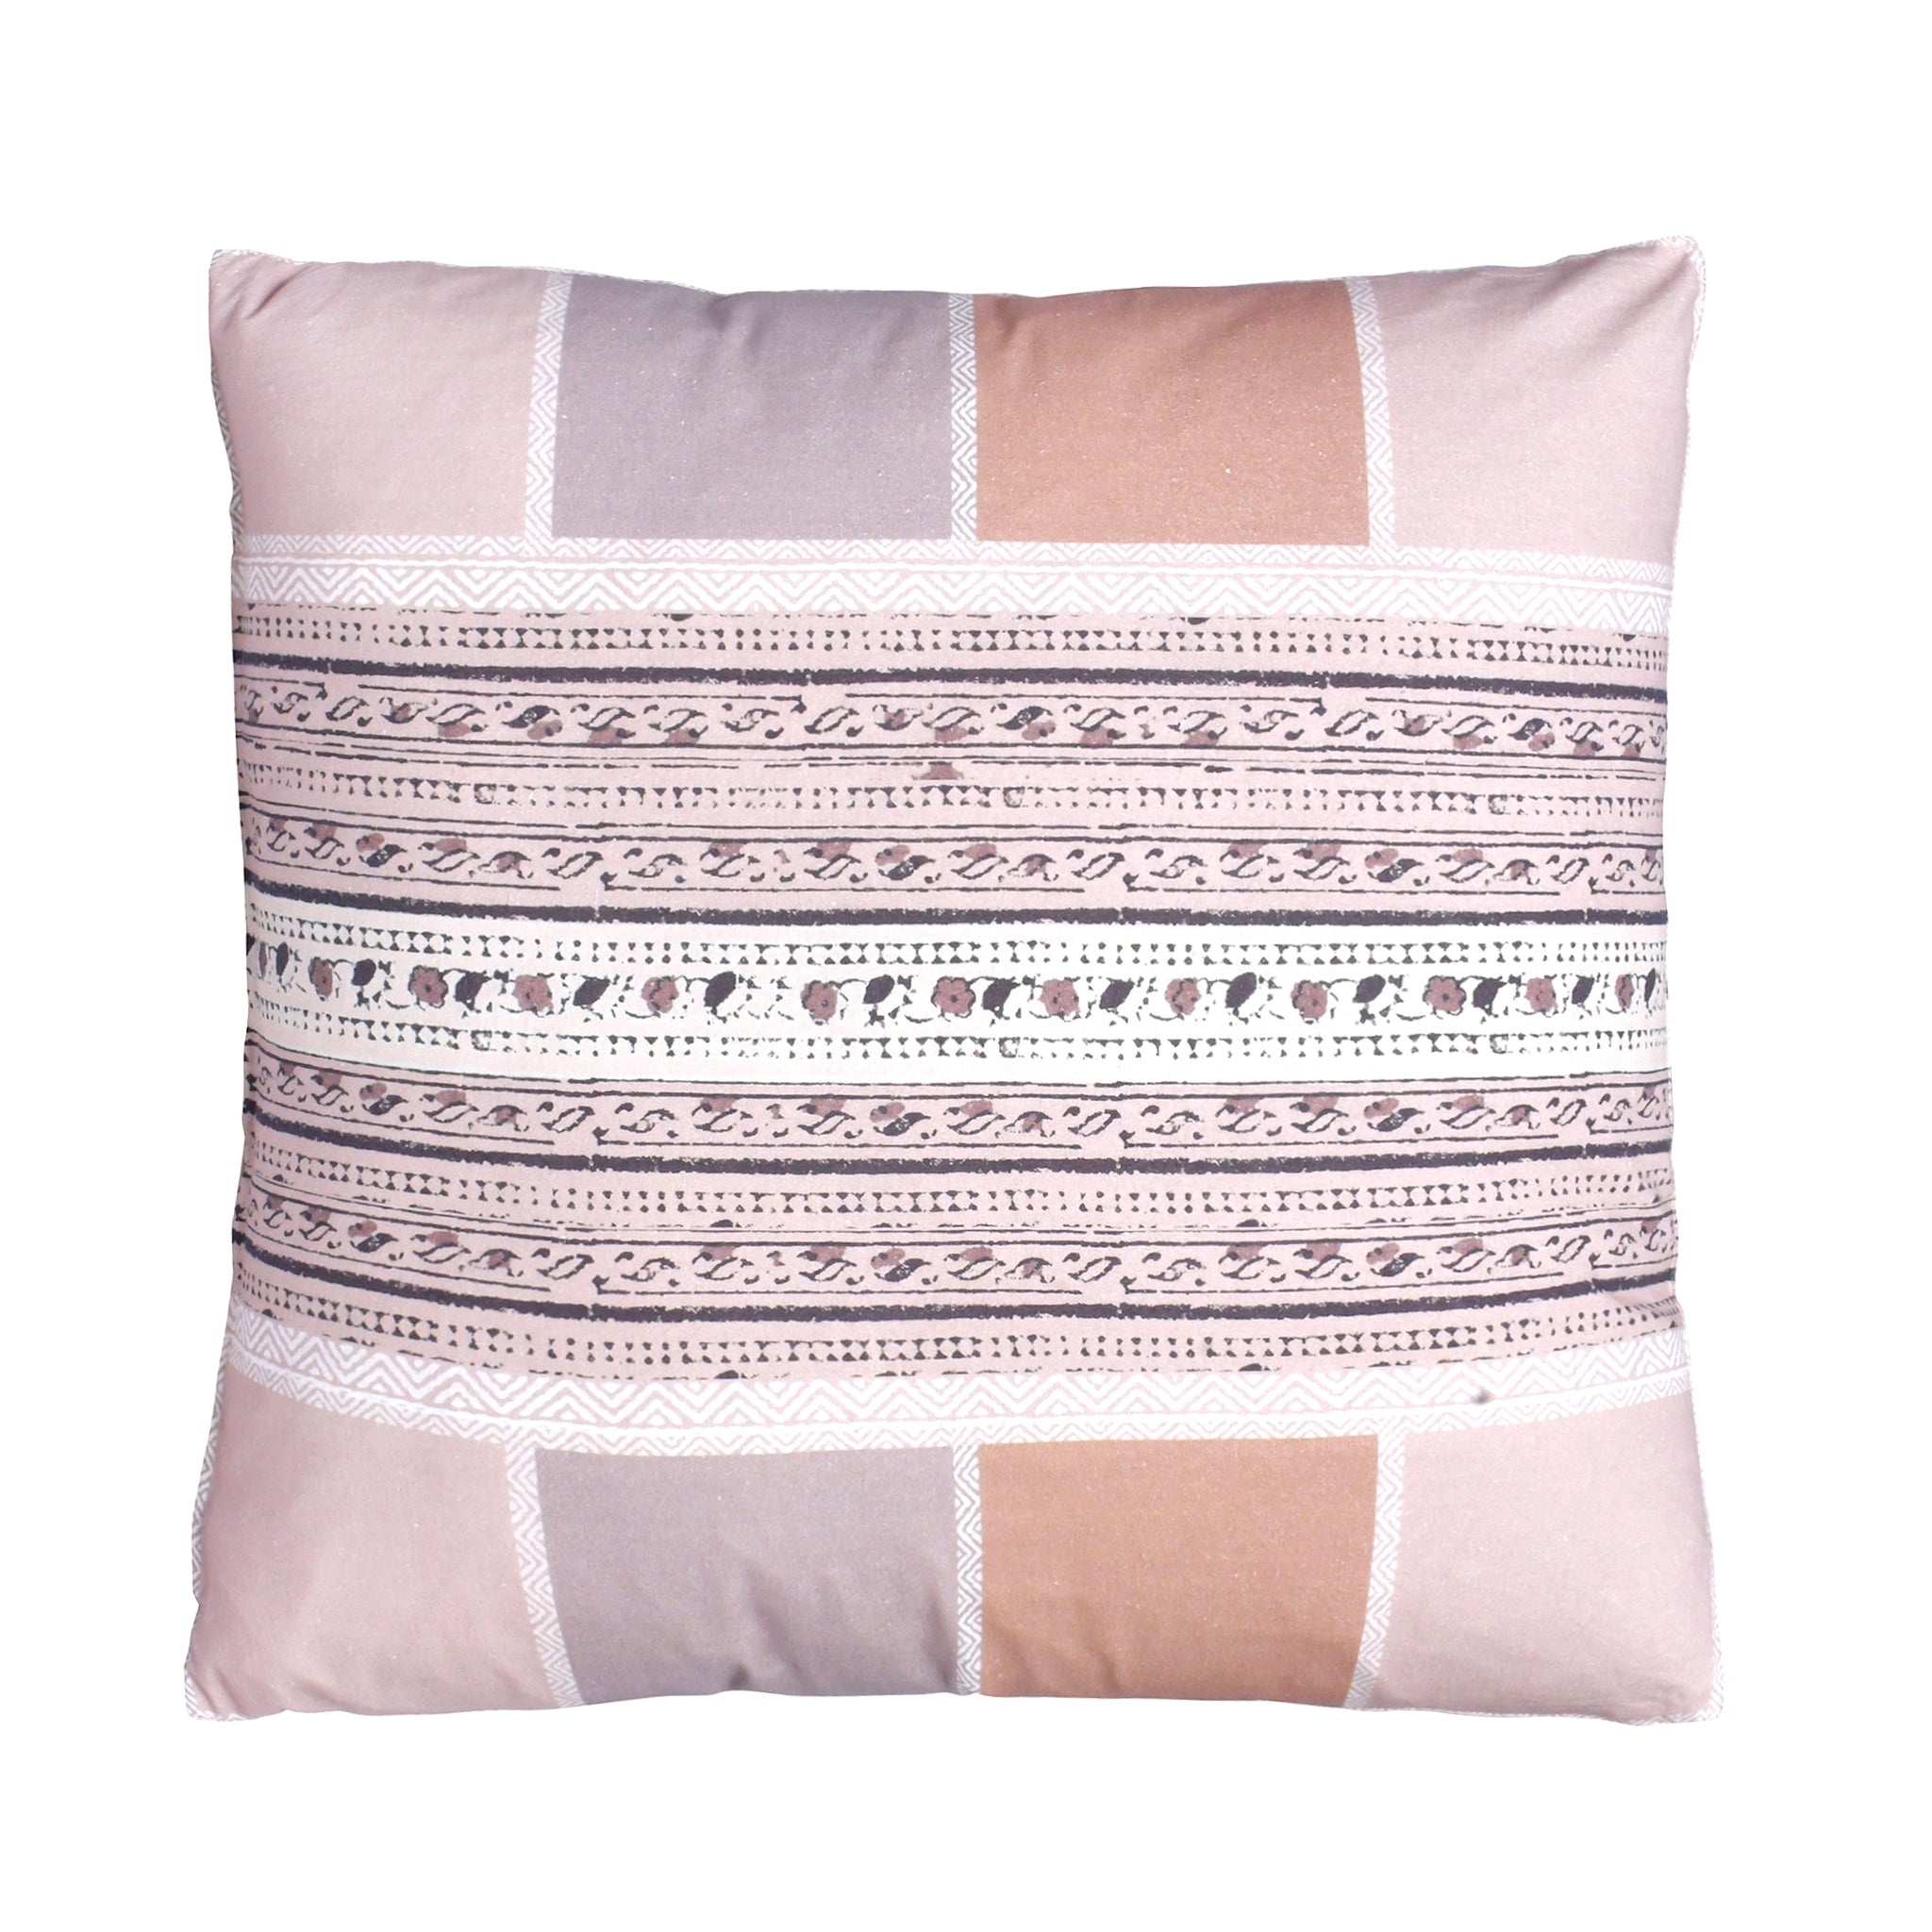 Cotton Cushion Cover - Patta and Salli Taupe